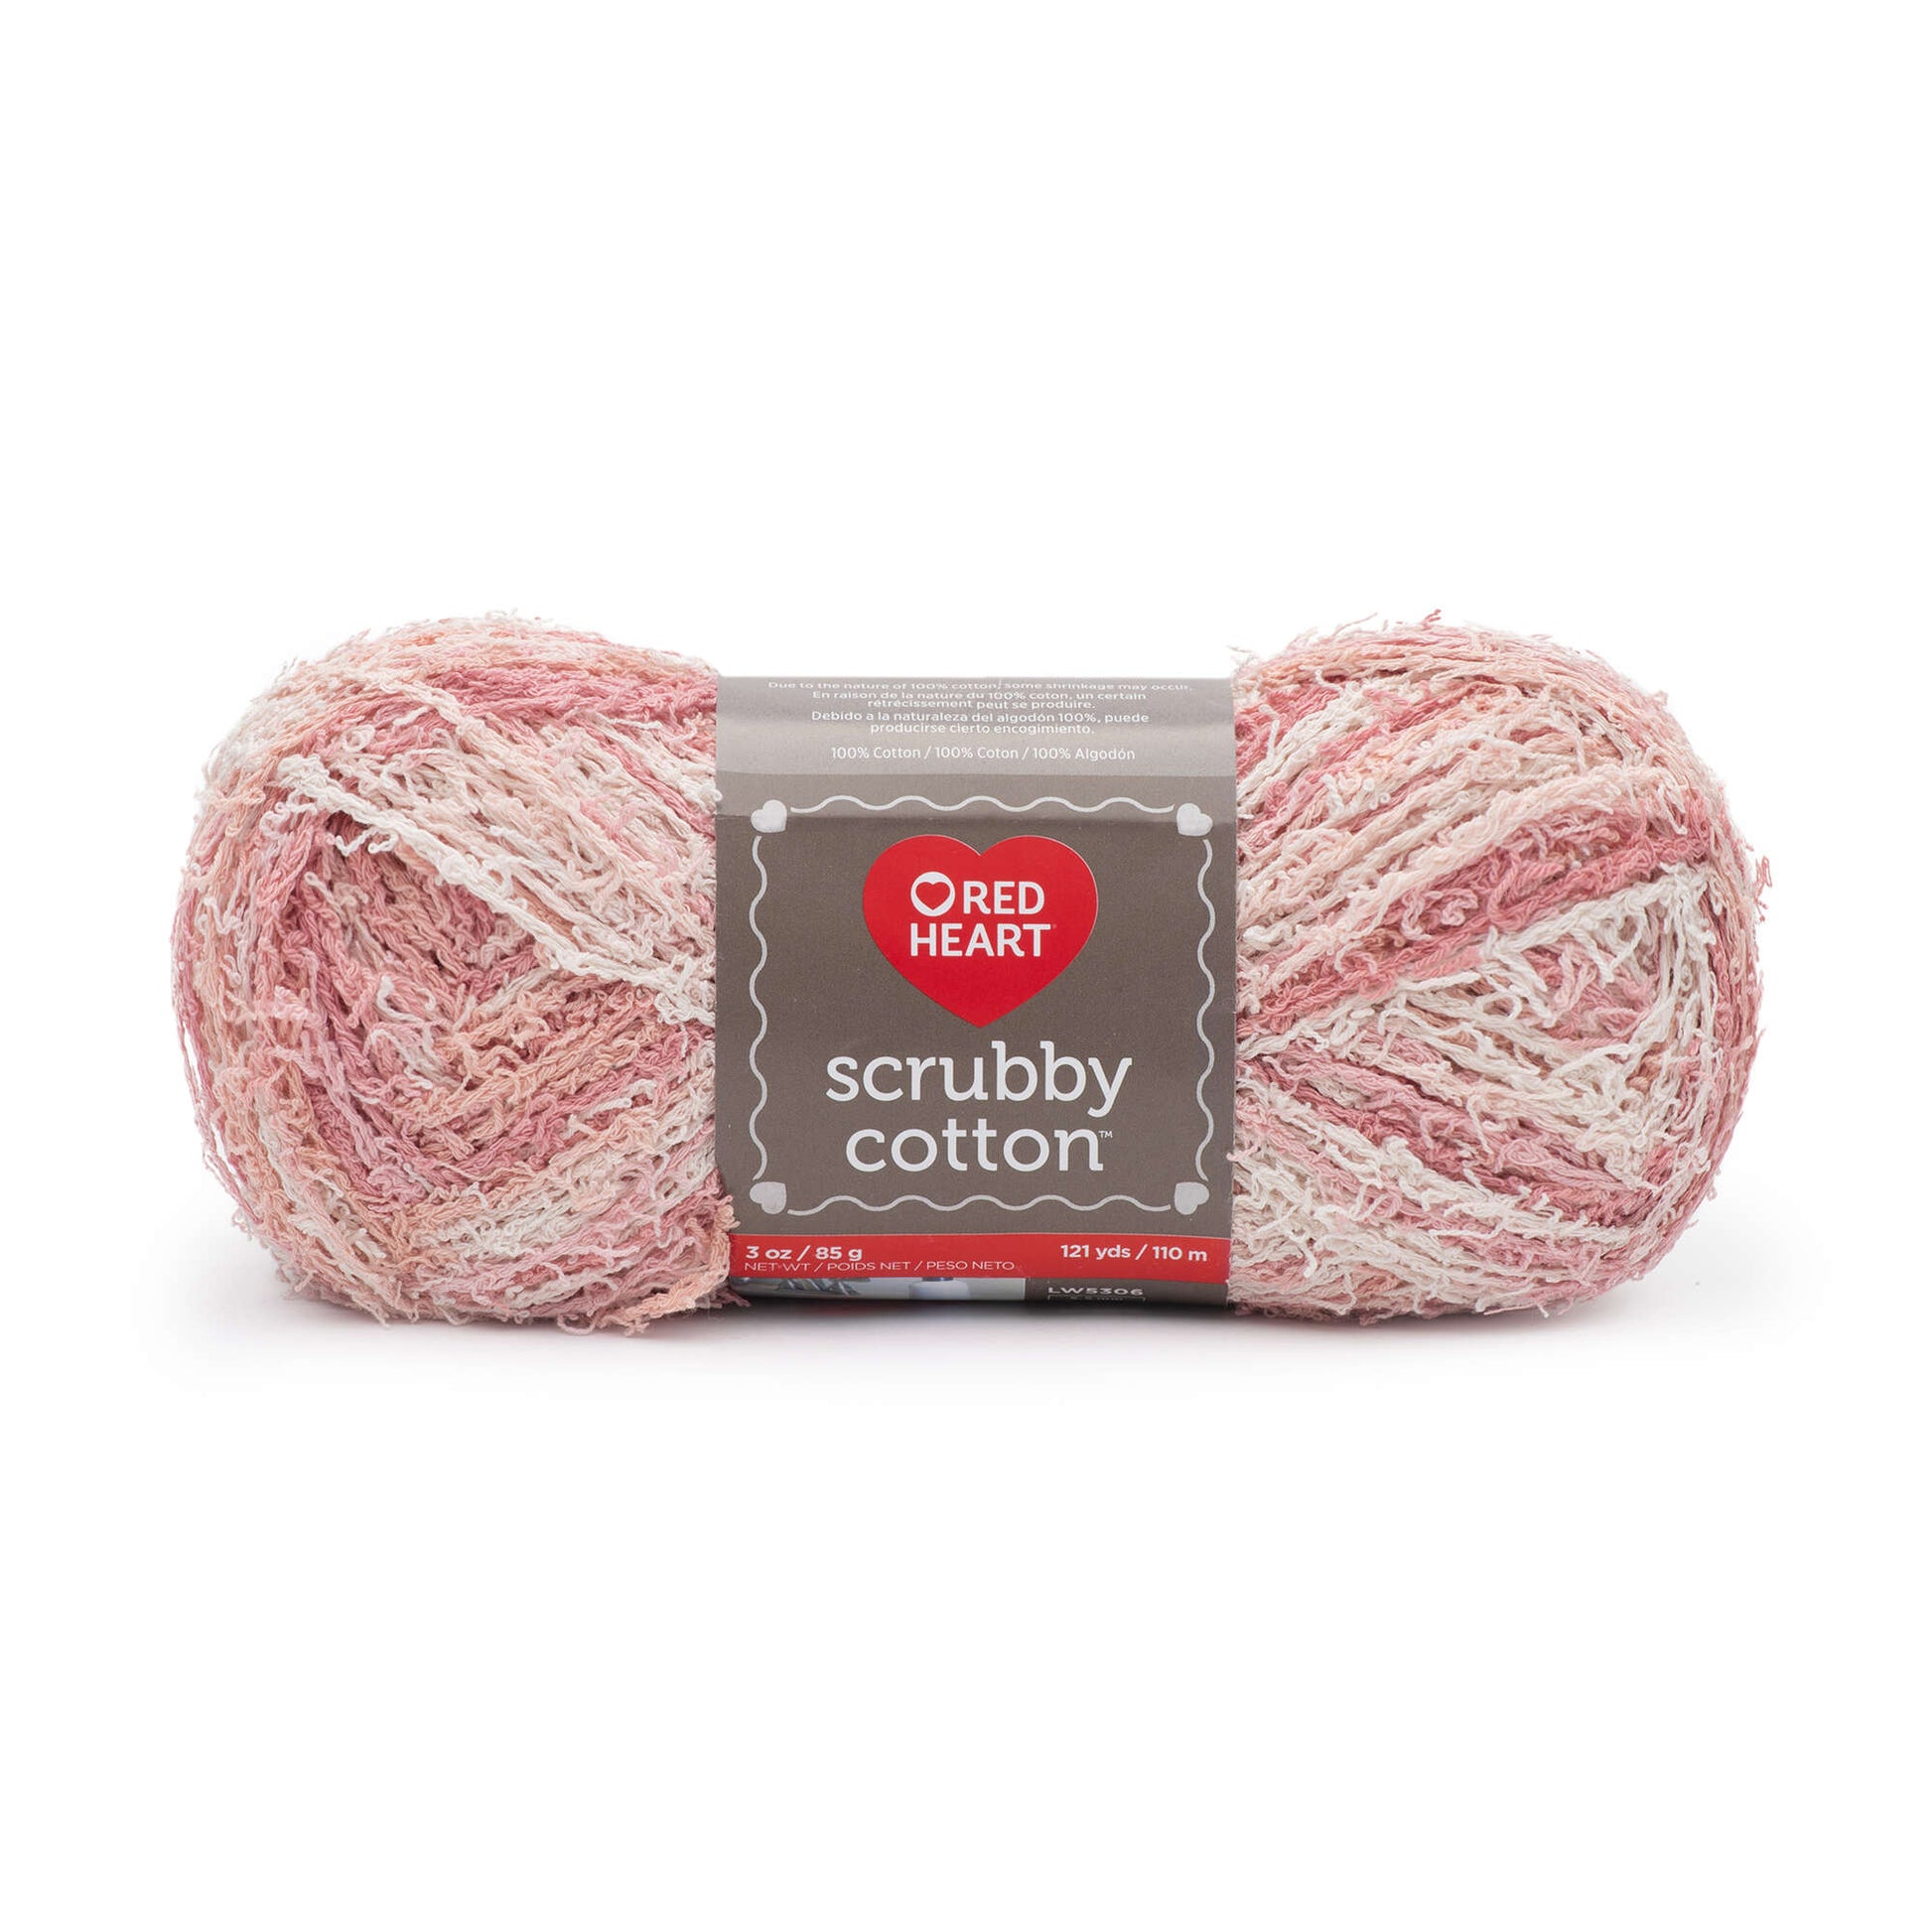 Red Heart Scrubby Cotton Yarn - Discontinued shades Blissful Print